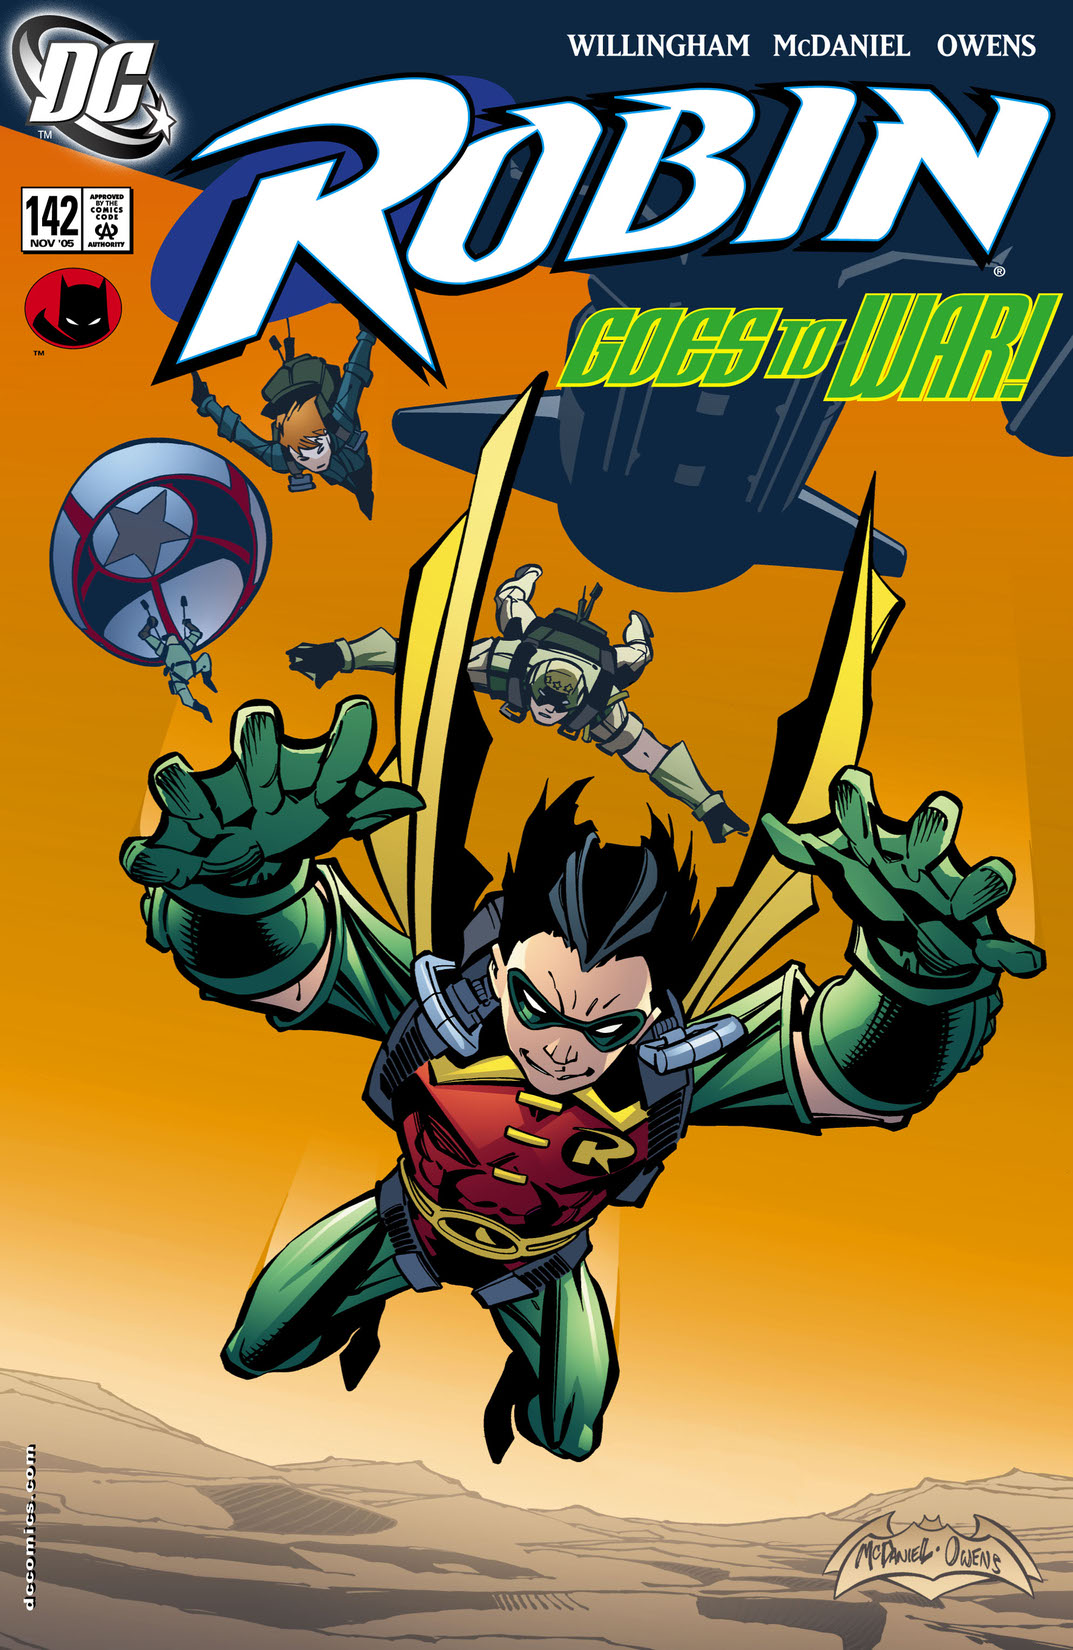 Robin (1993-) #142 preview images